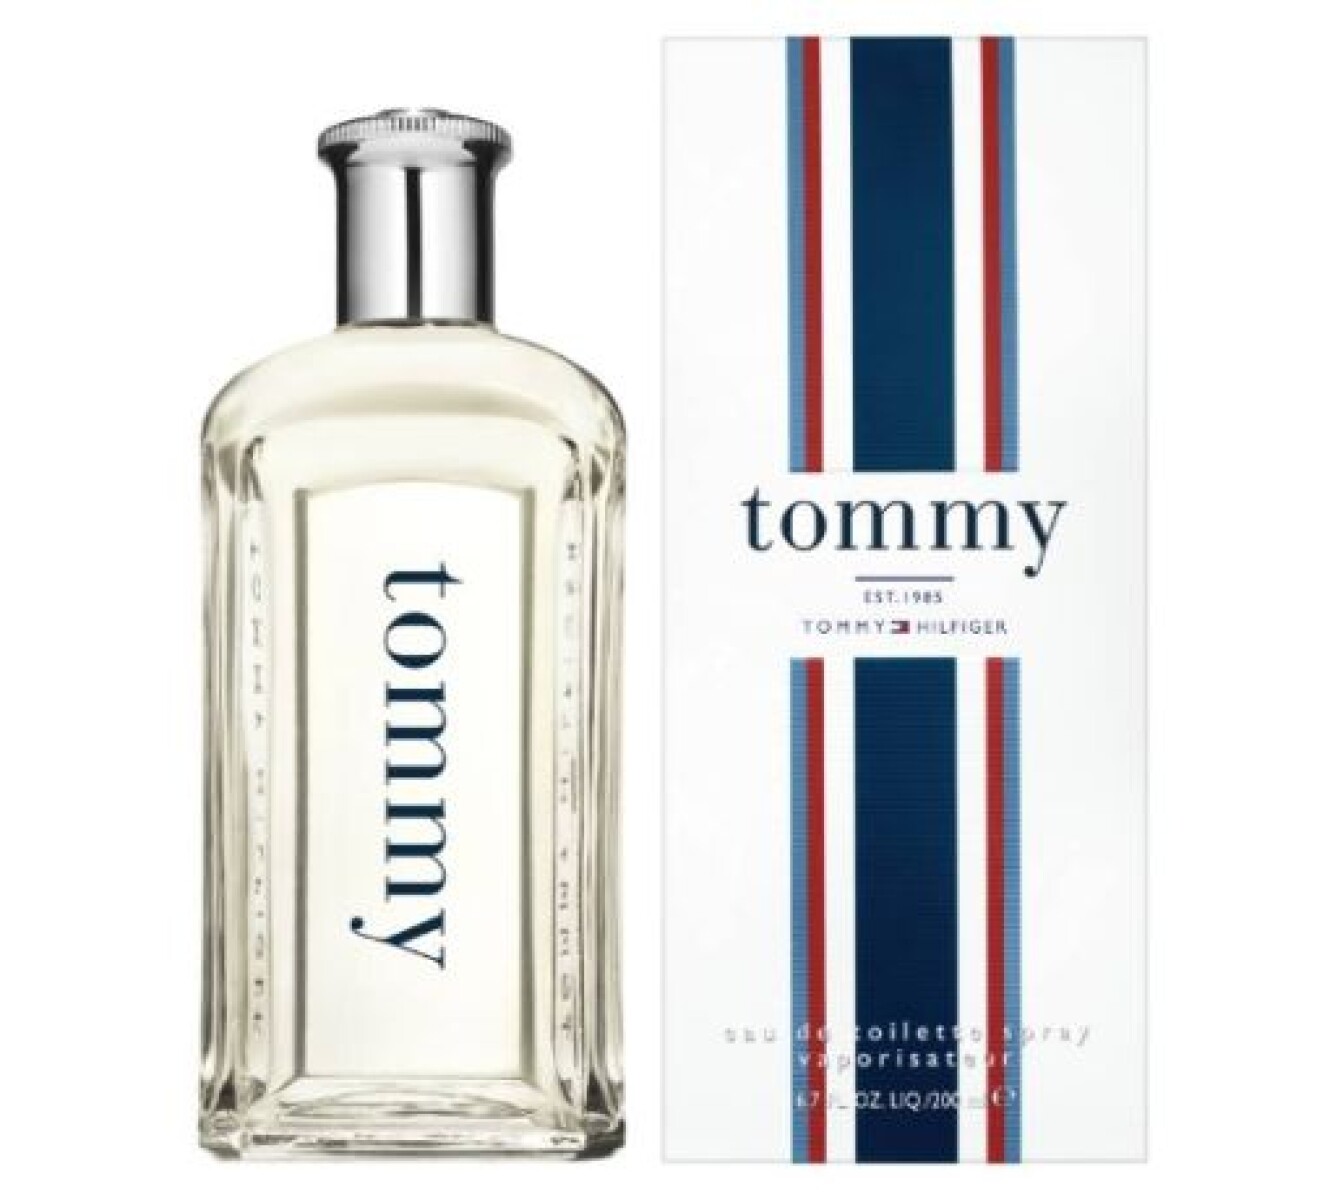 Tommy EDT 200 ml 